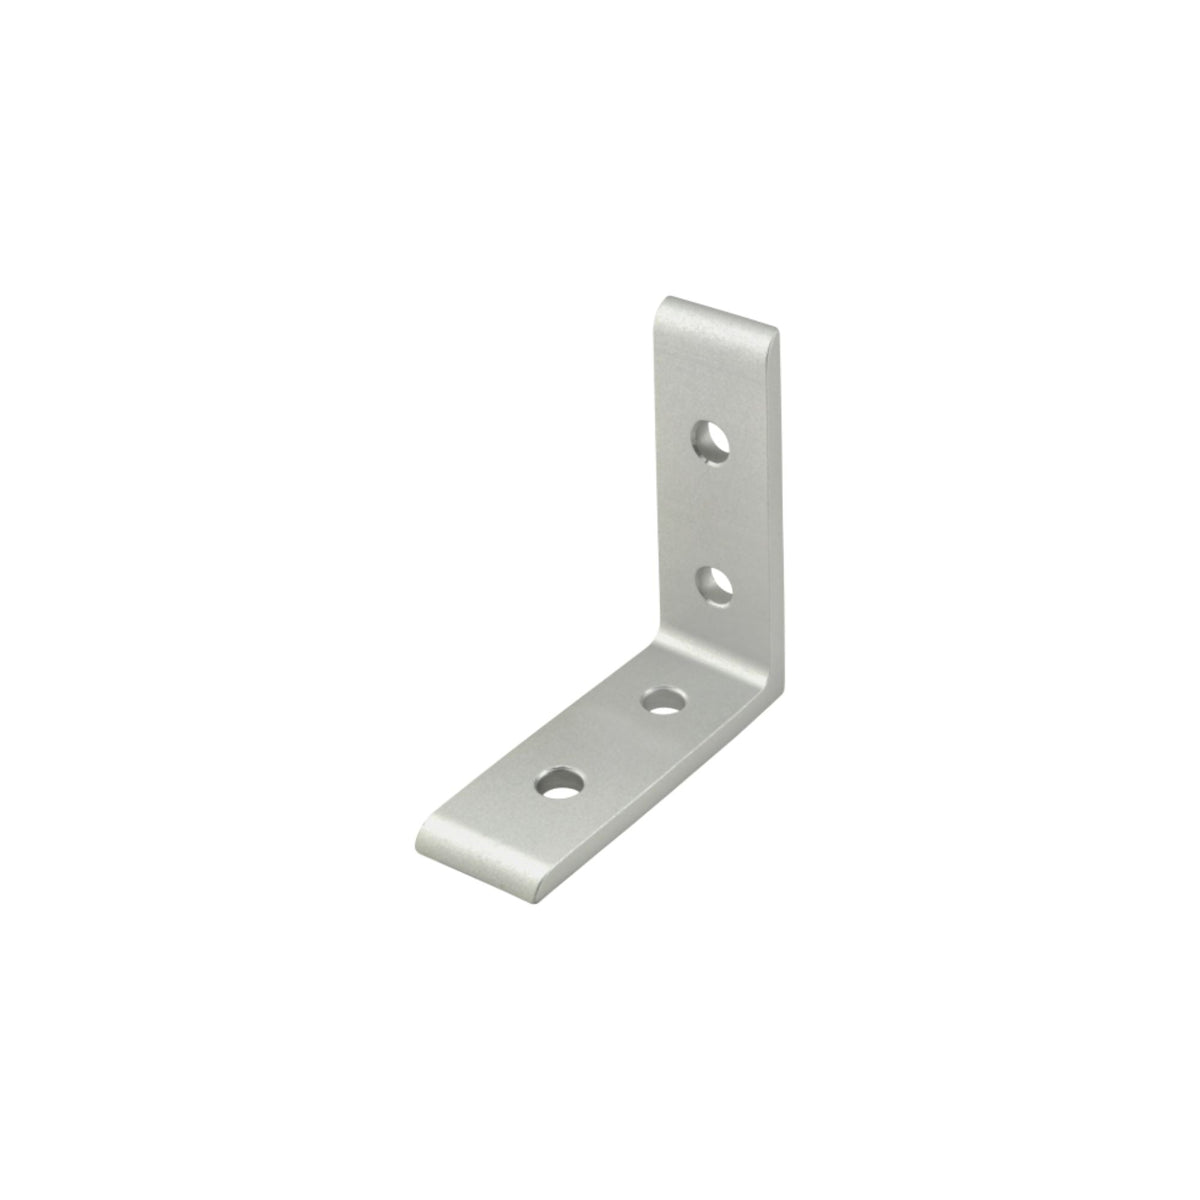 narrow inside corner bracket, with two holes along the bottom piece and two holes vertically along the right side piece